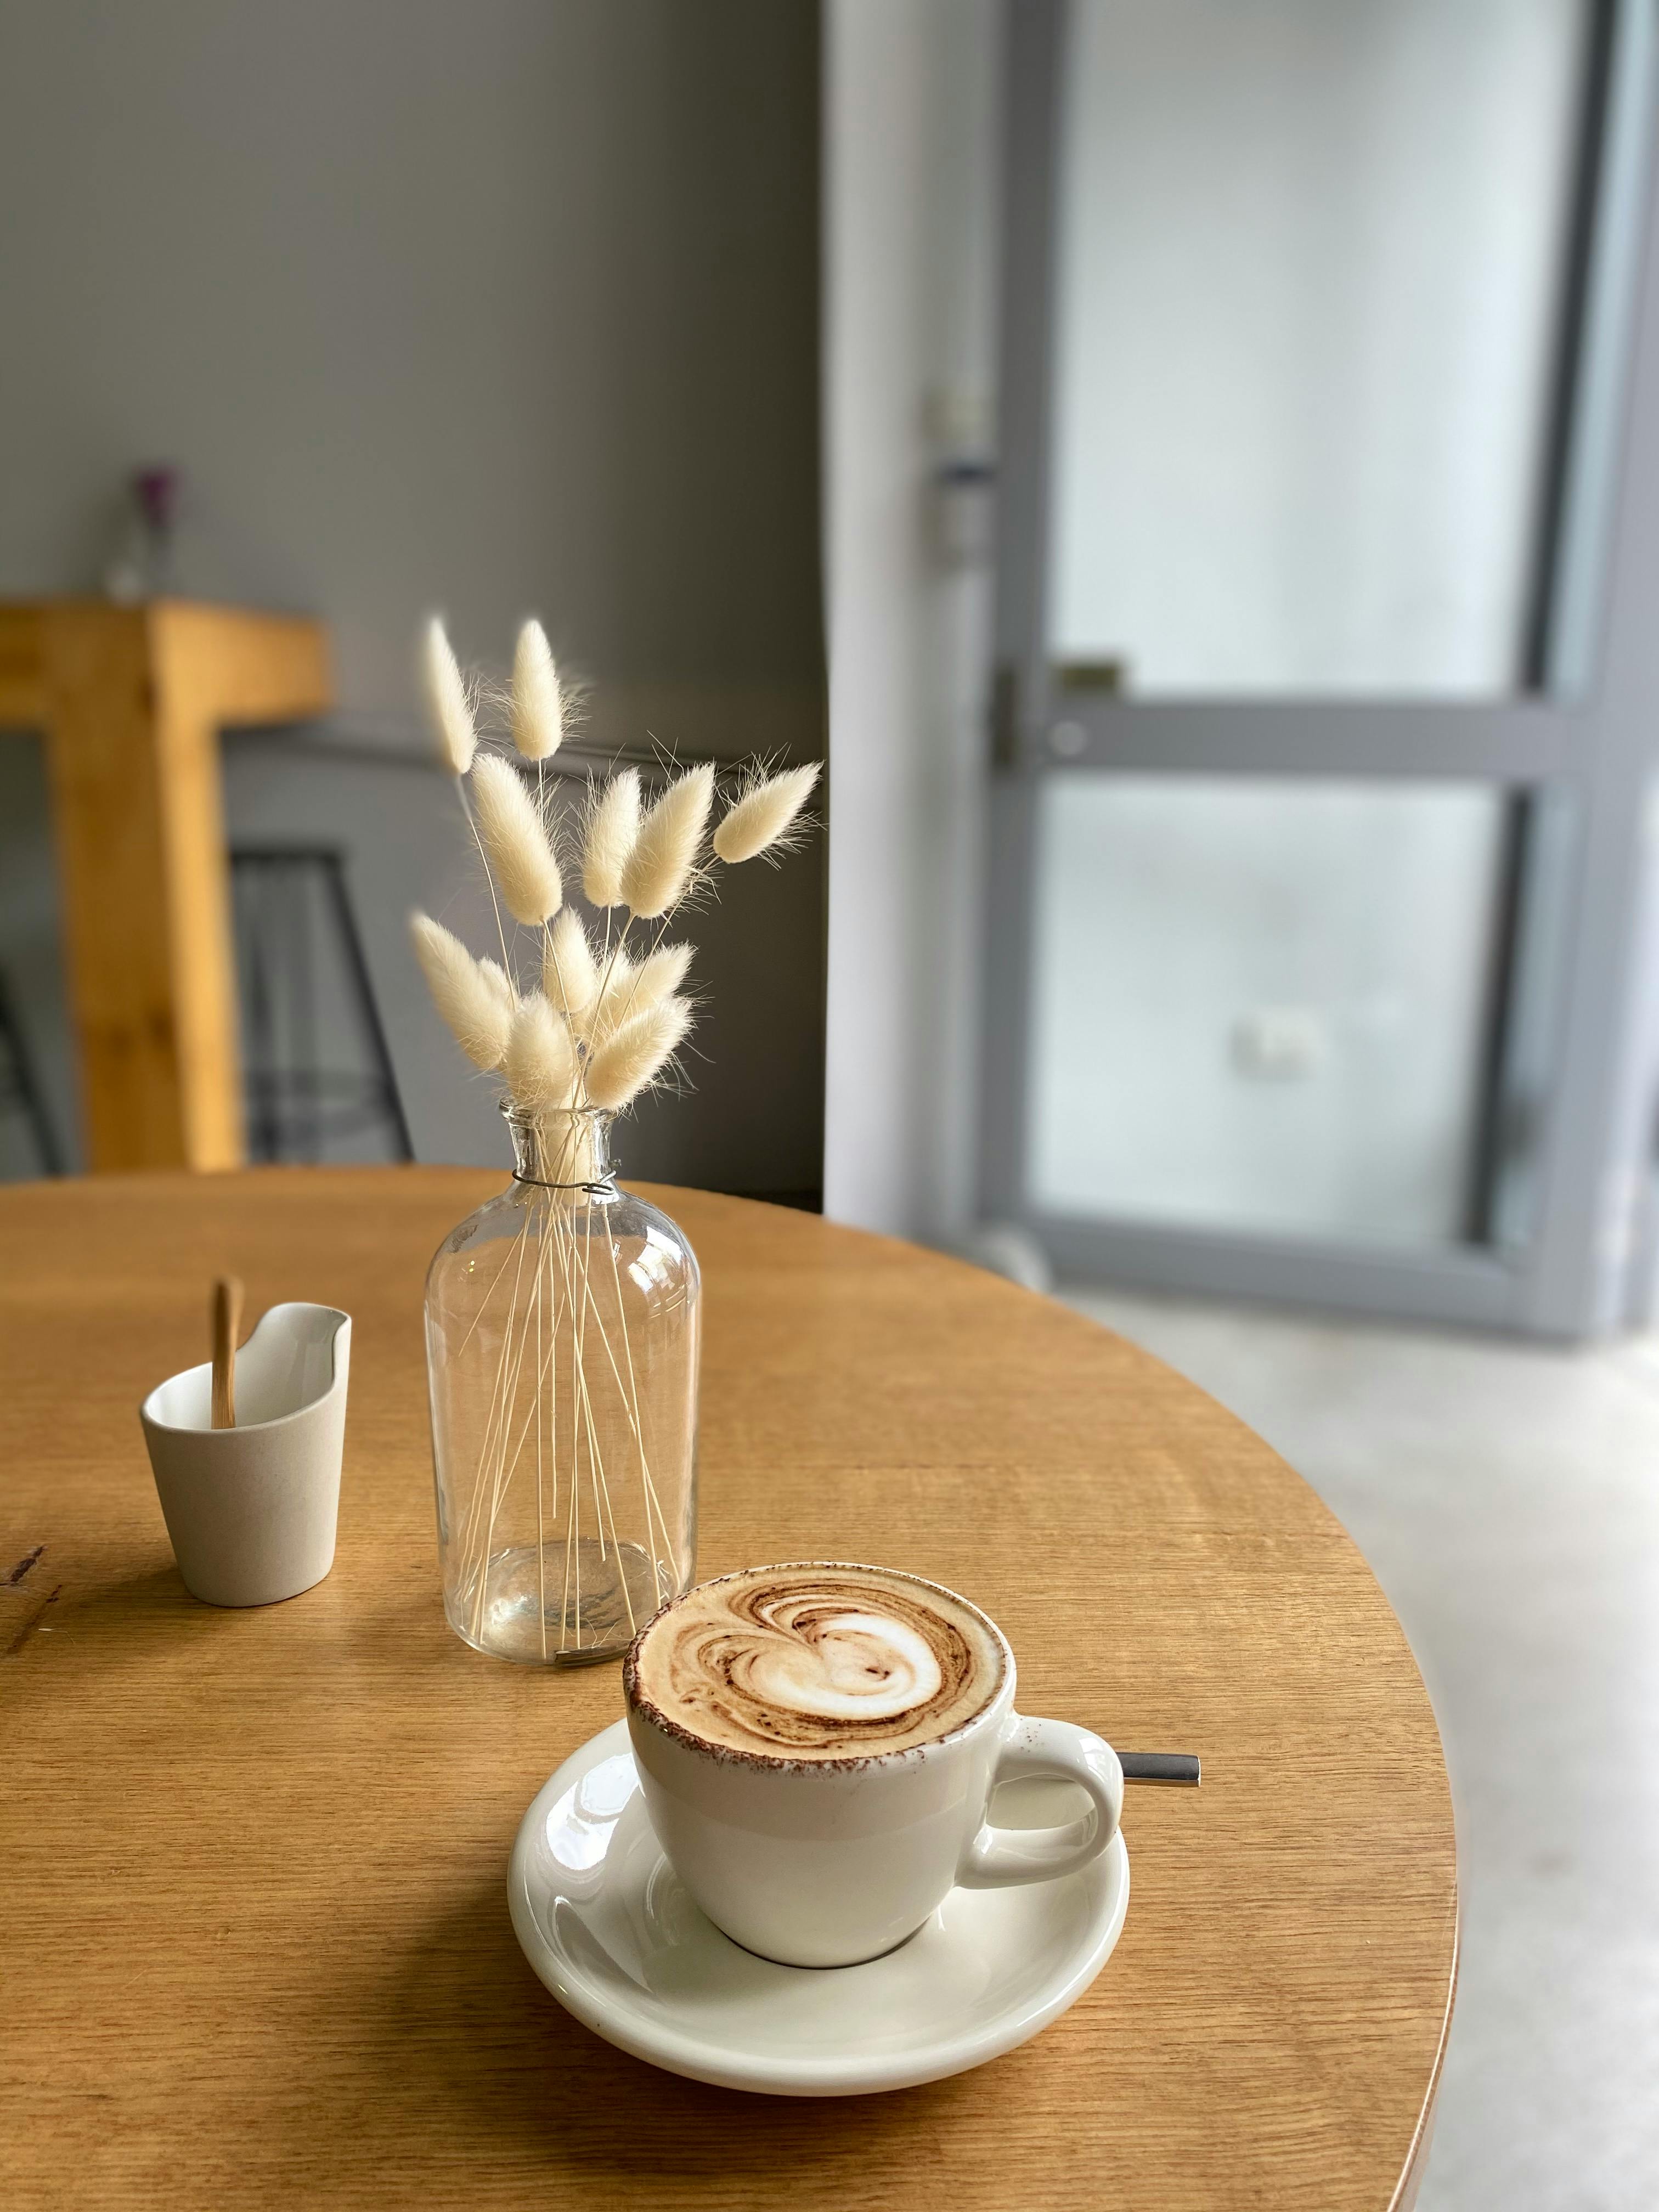 Coffee cup in a cafe | Source: Pexels